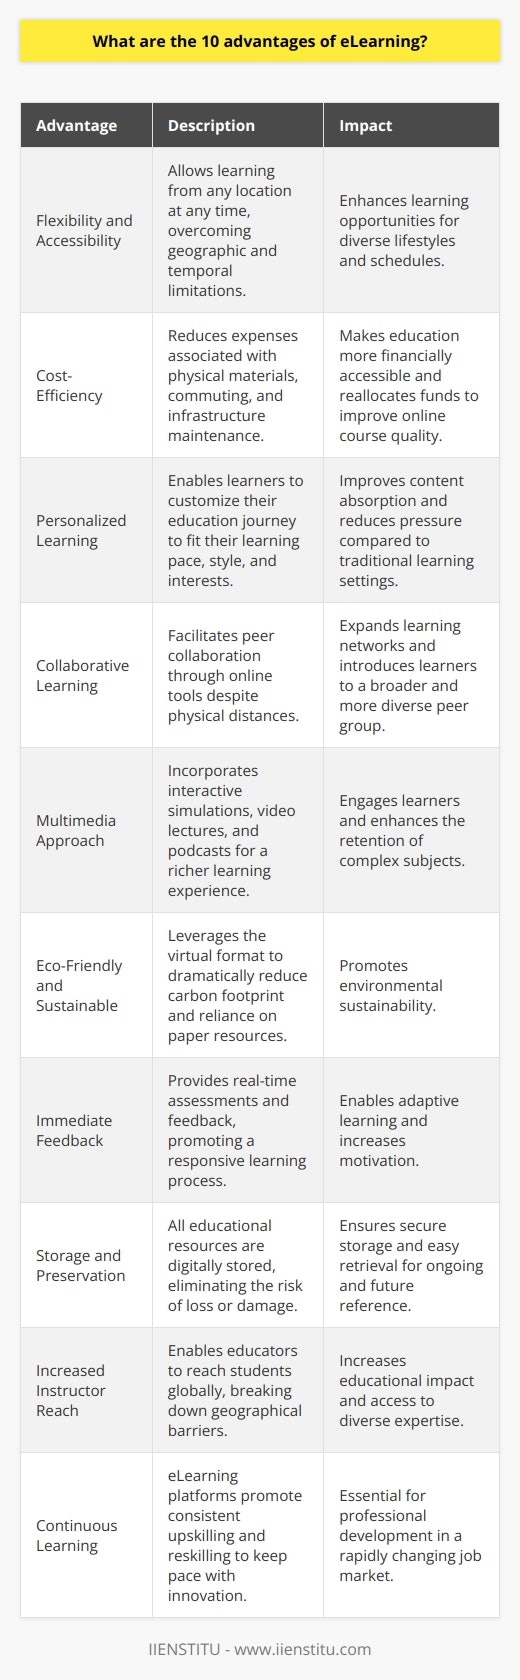 Advantages of eLearning1. Flexibility and Accessibility: eLearning surpasses geographic and time constraints, enabling learners to participate in educational courses from any location with an internet connection. Whether you're a morning bird or a night owl, resources are available at your convenience, offering a level of flexibility that traditional classroom settings can’t match.2. Cost-Efficiency: With eLearning, substantial cost savings come into play as there's no need for physical learning materials, commuting, or maintaining educational infrastructures. These savings make education more financially accessible to a wider audience and allow for funds to be reallocated to enhance the quality of online courses.3. Personalized Learning: eLearning platforms often allow learners to tailor their educational journey according to their specific strengths, weaknesses, and interests. The ability to learn at one's own pace helps in effectively absorbing the content and reduces the pressure often associated with traditional learning environments.4. Collaborative Learning: Despite the physical distance between users, eLearning platforms like IIENSTITU facilitate connections by providing opportunities for students to collaborate through various online tools, mirroring the collective learning that takes place in a traditional classroom, yet often with a wider and more diverse peer group.5. Multimedia Approach: eLearning takes advantage of multimedia features to enrich the learning experience. From interactive simulations to engaging video lectures and enlightening podcasts, this approach makes learning not only more engaging but also can enhance retention and understanding of complex subjects.6. Eco-Friendly and Sustainable: The virtual nature of eLearning dramatically reduces the carbon footprint associated with traditional learning. Digital materials negate the need for paper, and with no commute necessary, eLearning proves to be a greener and more environmentally sustainable method of education.7. Immediate Feedback: With real-time assessments and interactive quizzes, eLearning provides instant feedback that helps learners quickly understand their grasp of material. This immediate reinforcement serves to motivate learners and adjust their study strategies accordingly.8. Storage and Preservation: Unlike traditional learning where one might lose or damage paper notes, eLearning ensures that all resources are digitally preserved. This accessibility ensures that materials are not only securely stored but also easily retrieved for revision or future reference.9. Increased Instructor Reach: Instructors and institutions are no longer confined by the limitations of their locale. Through eLearning platforms, educators can transcend borders, offering their expertise to students regardless of their geographical barriers, amplifying the reach and impact of their teachings.10. Continuous Learning: The digital landscape is ever-evolving, and eLearning platforms promote a culture of consistent upskilling and reskilling. This benefit is particularly pertinent in today's rapidly changing job market, where continuous learning is not just an advantage but a necessity for keeping up with the pace of innovation.In conclusion, eLearning provides an array of advantages that make it an increasingly attractive alternative or supplement to traditional education. Its ability to offer flexible, cost-effective, personalized, and collaborative learning experiences that are not bound by geographical limitations, while also being eco-friendly, makes it a compelling choice for the modern learner. These benefits underscore why institutions like IIENSTITU have embraced eLearning as a pivotal part of their educational offerings.